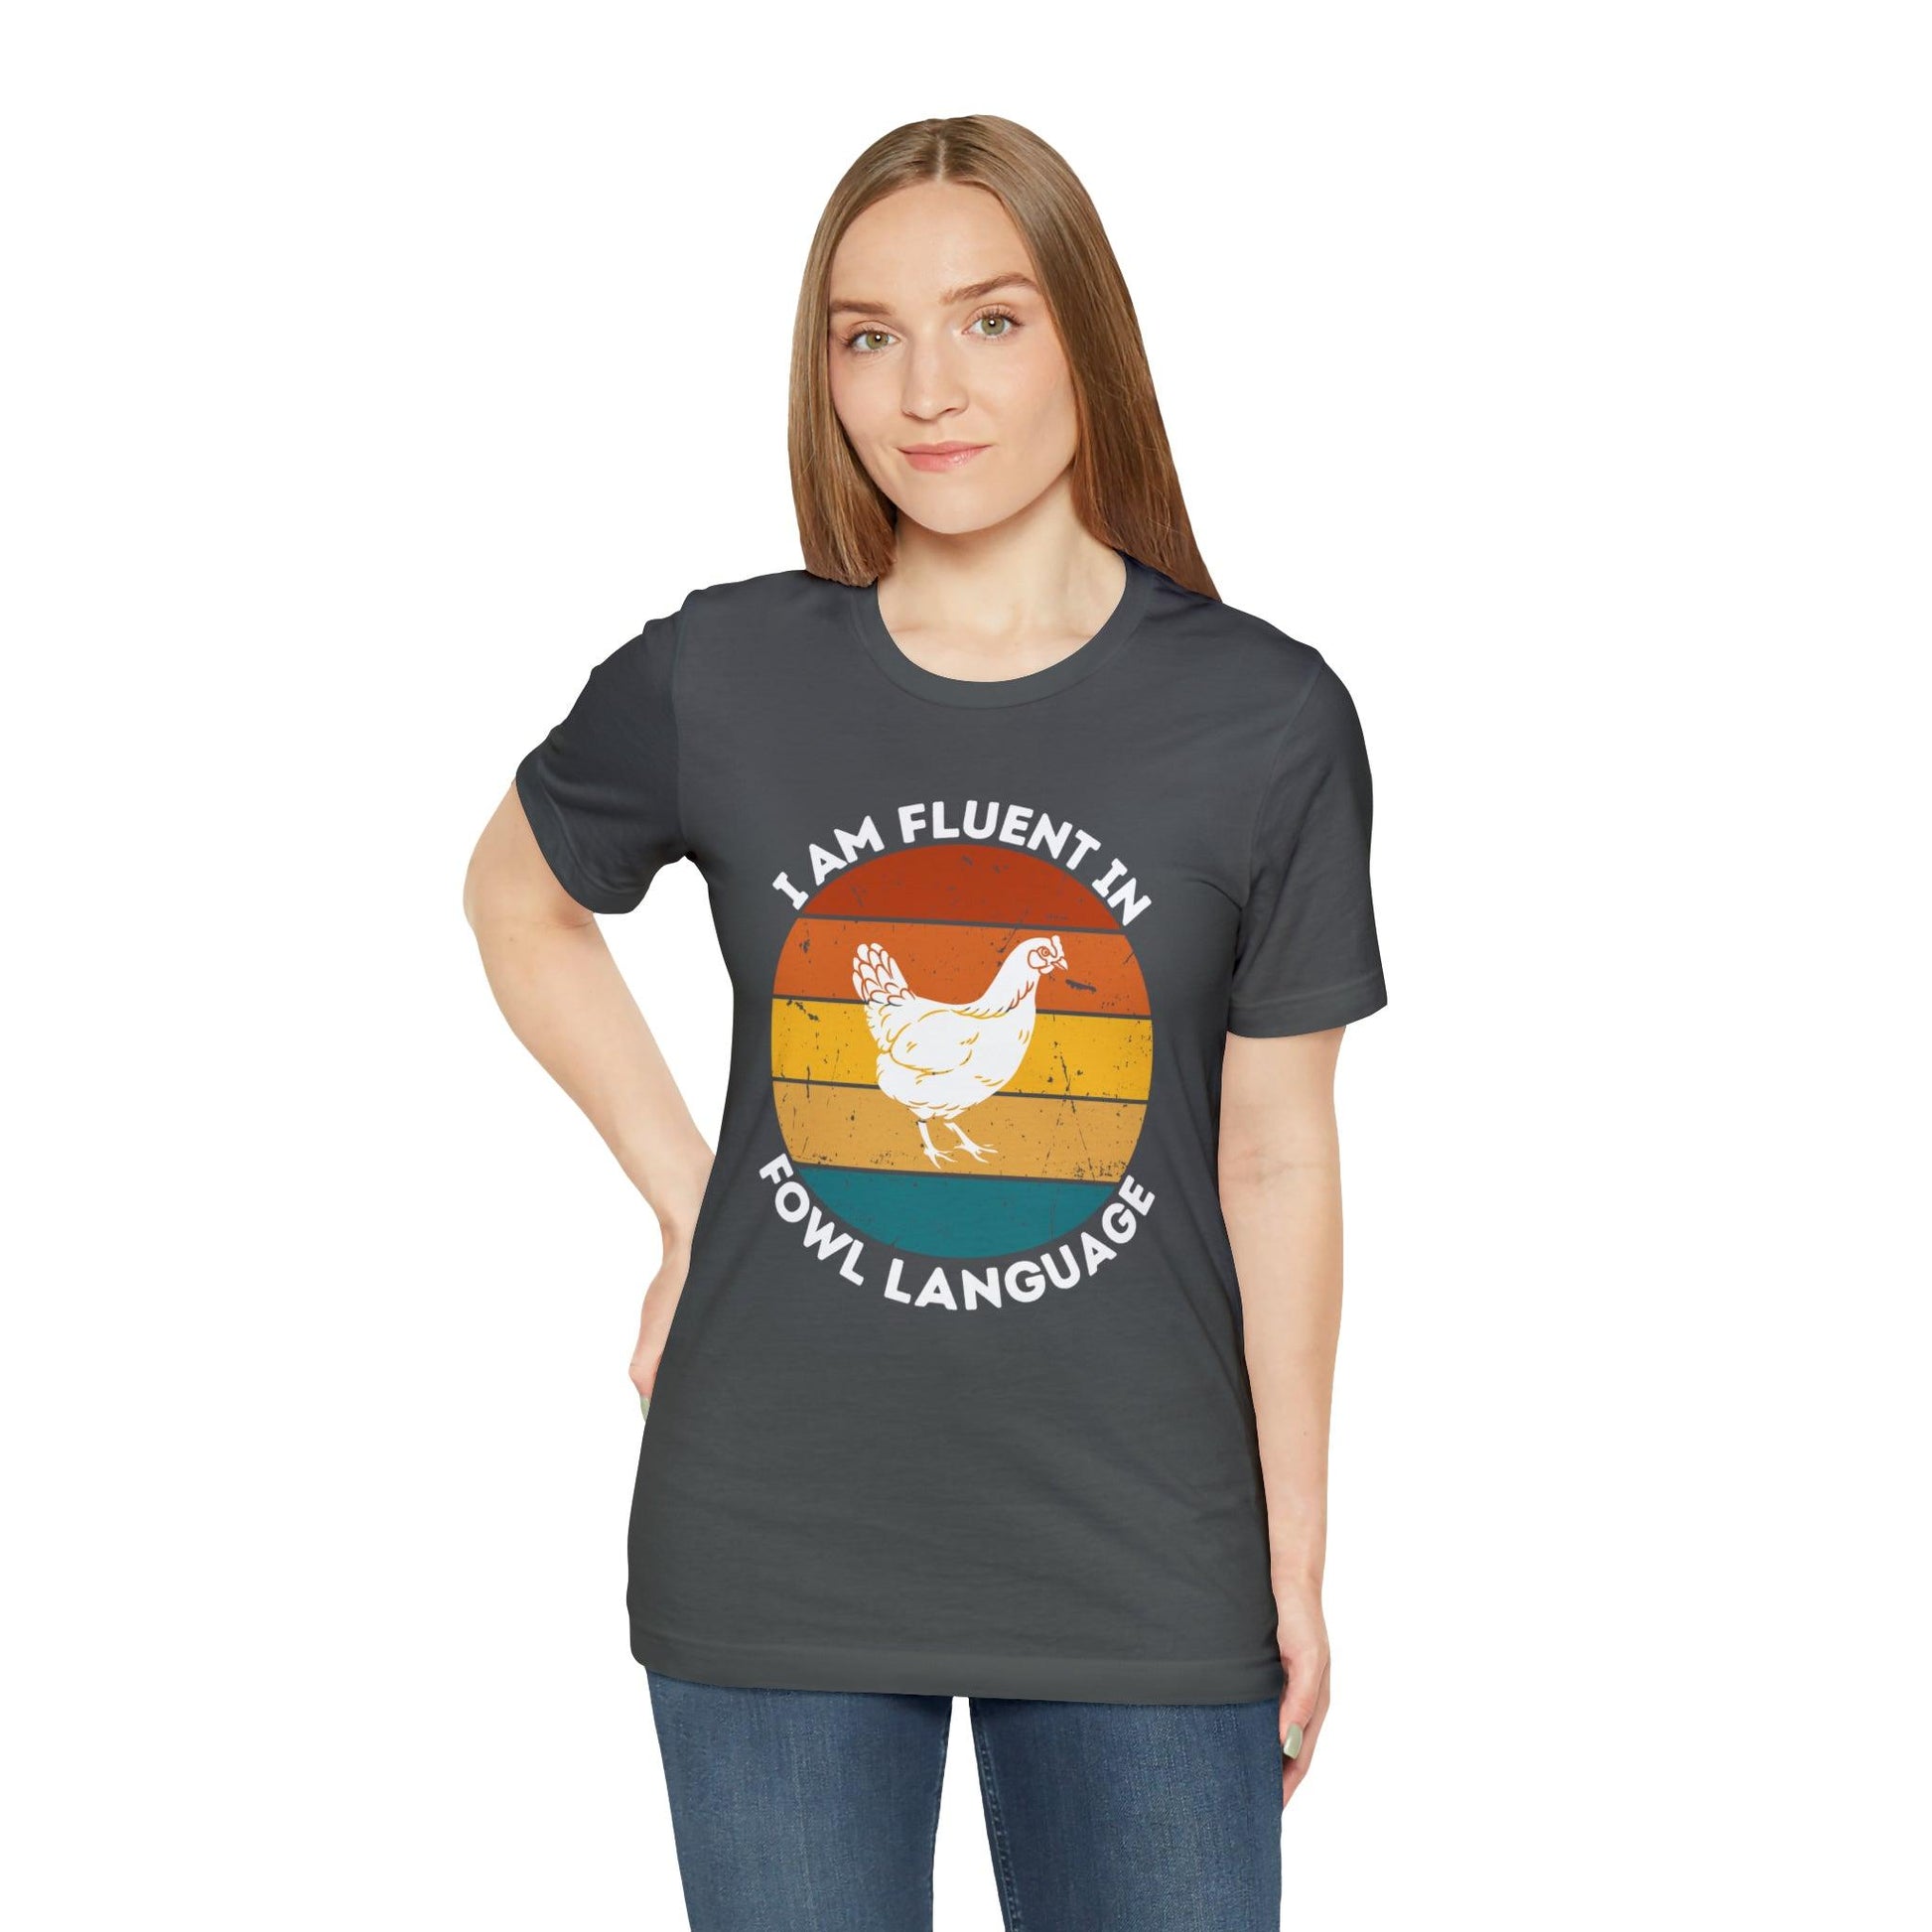 Funny Chicken Owner Gift, Farming Shirt for Farm Lover Shirt, Gift For Chicken Lover gift, Farmer Gift Shirt Chicken Tee Fowl Language shirt - Giftsmojo